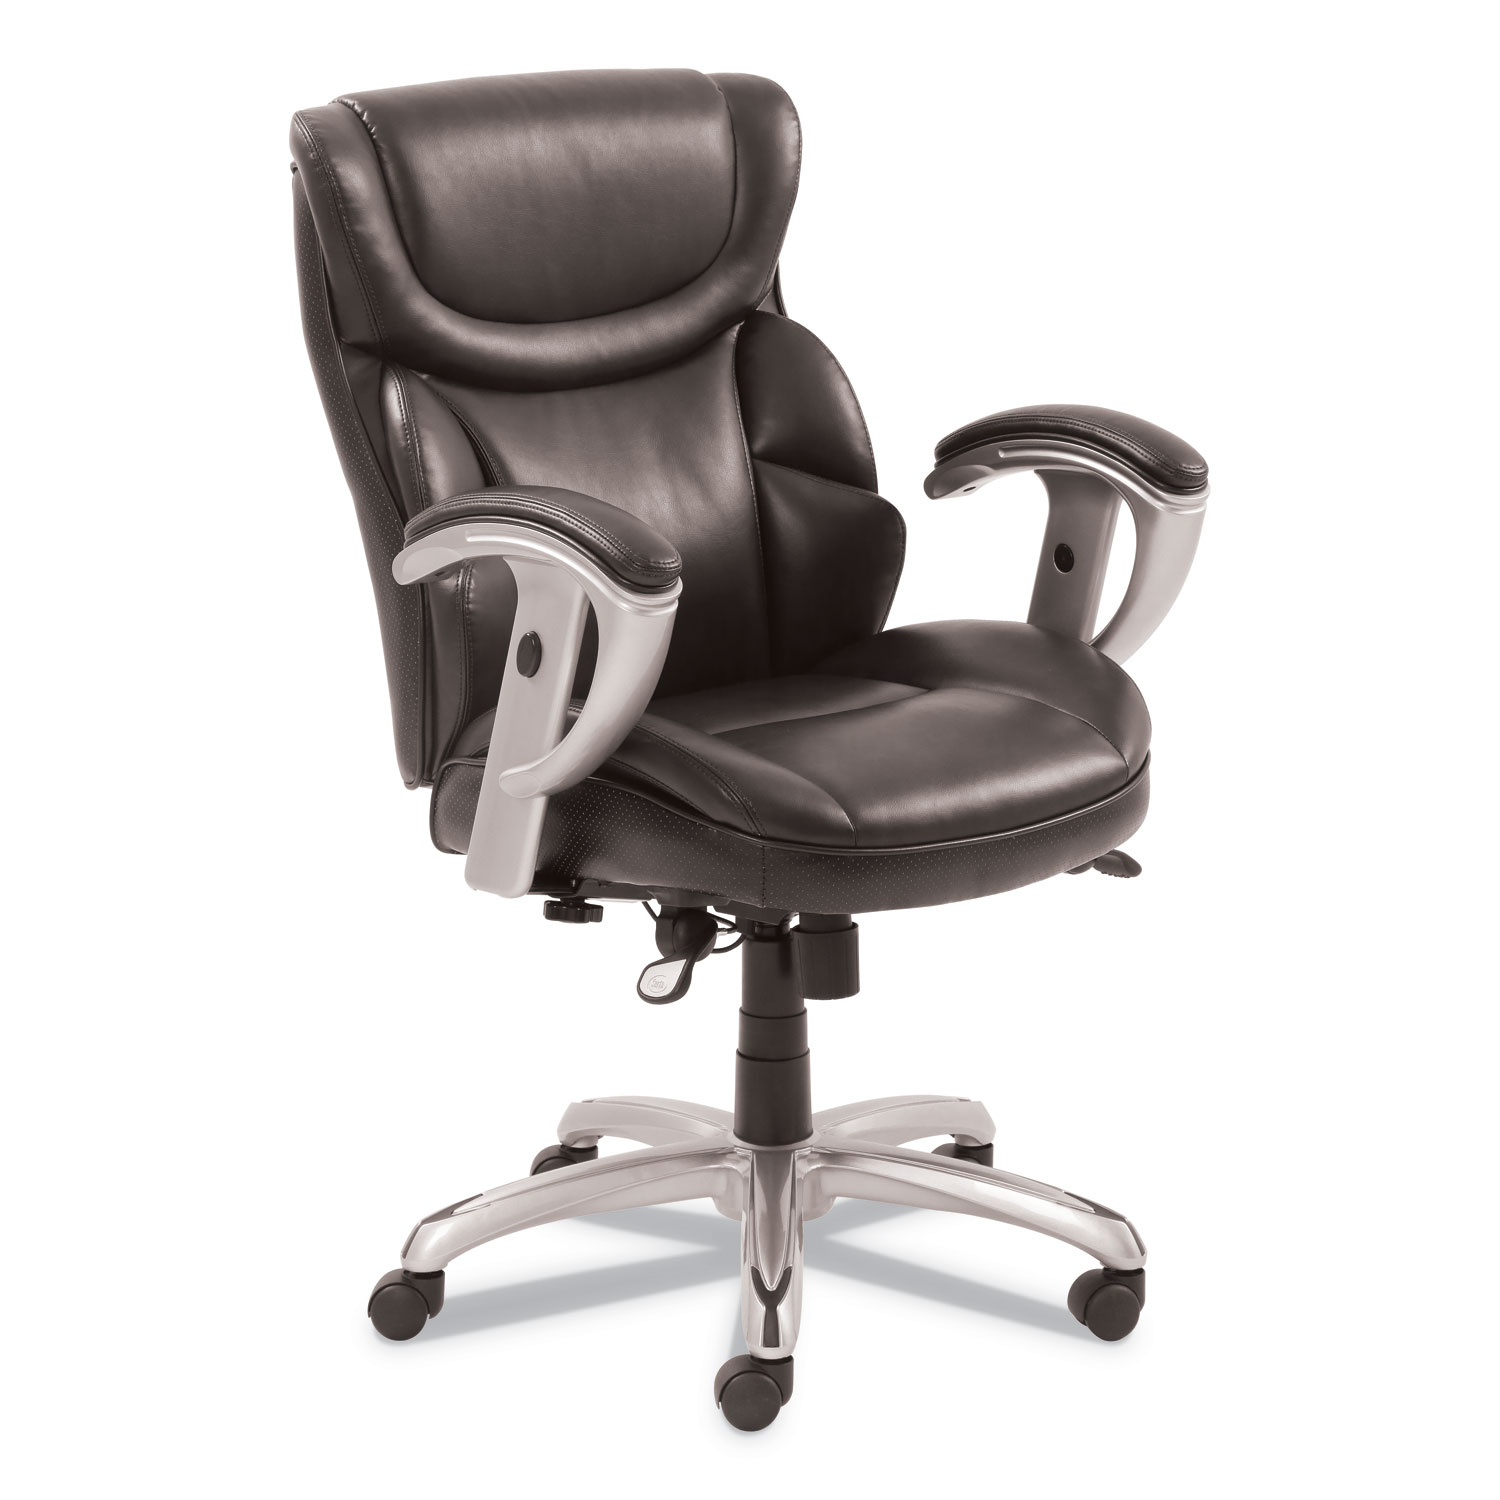  SertaPedic 49711BRW Emerson Task Chair, Supports up to 300 lbs., Brown Seat/Brown Back, Silver Base (SRJ49711BRW) 